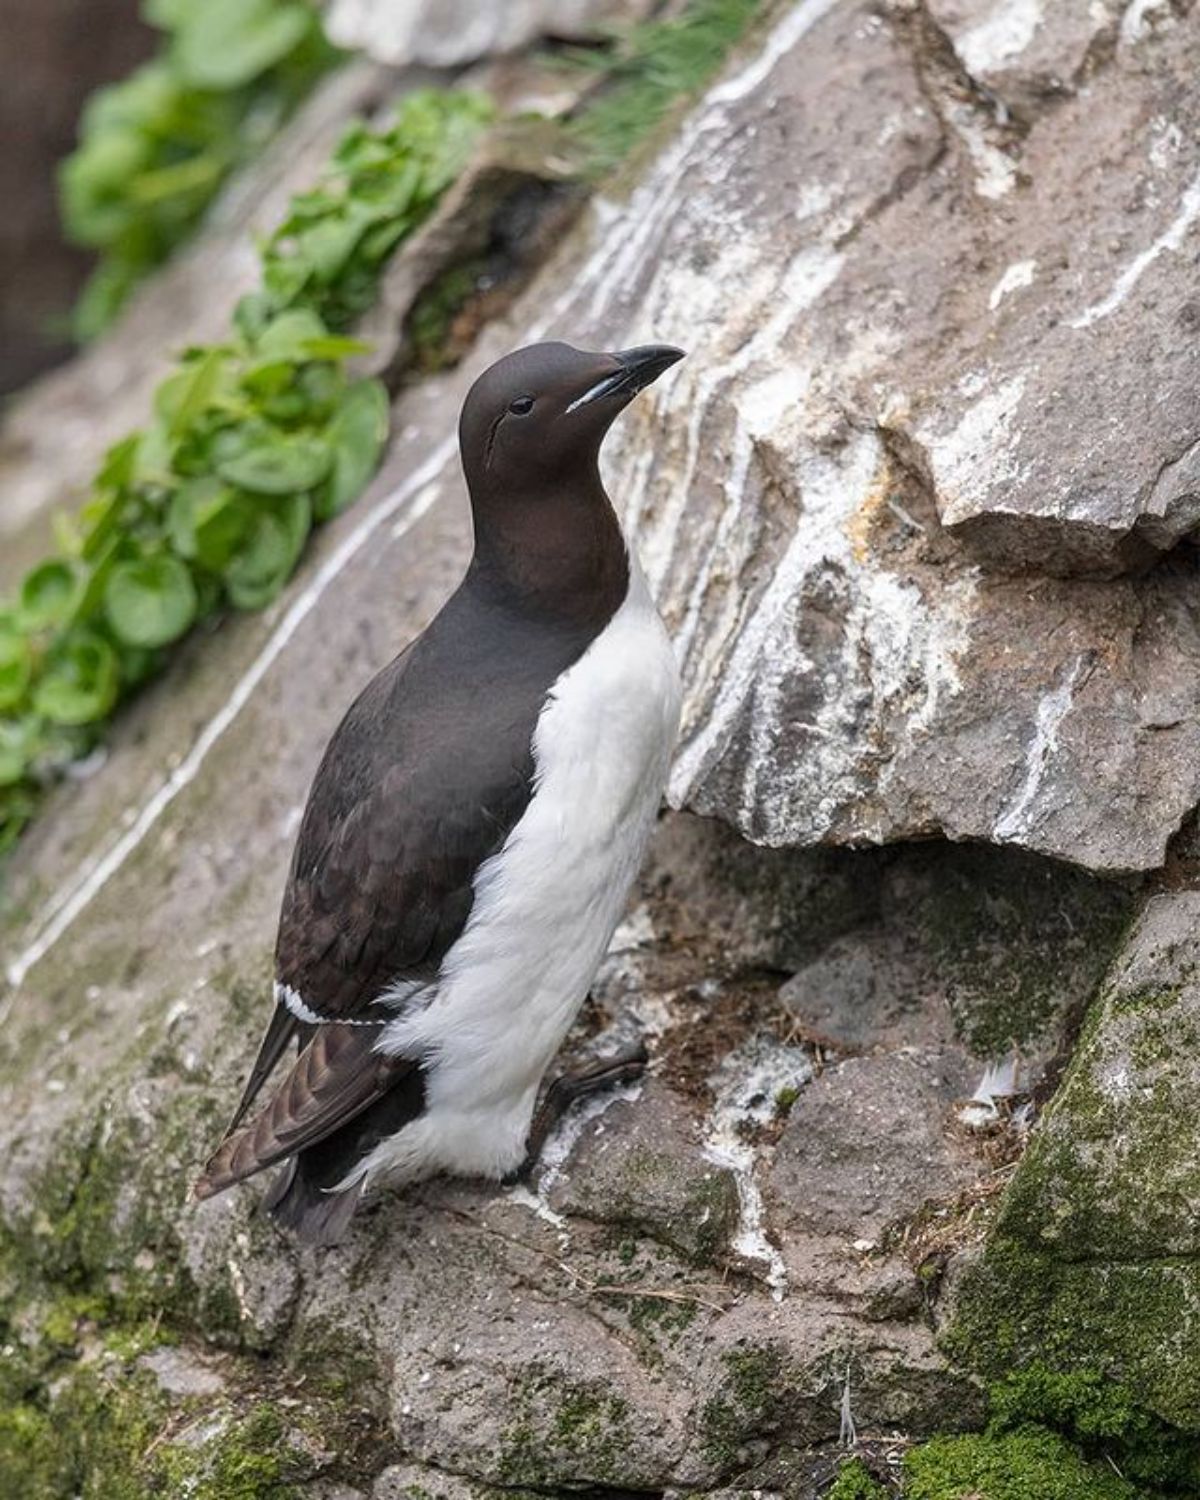 A beautiful Thick-billed Murre perched on a rock.